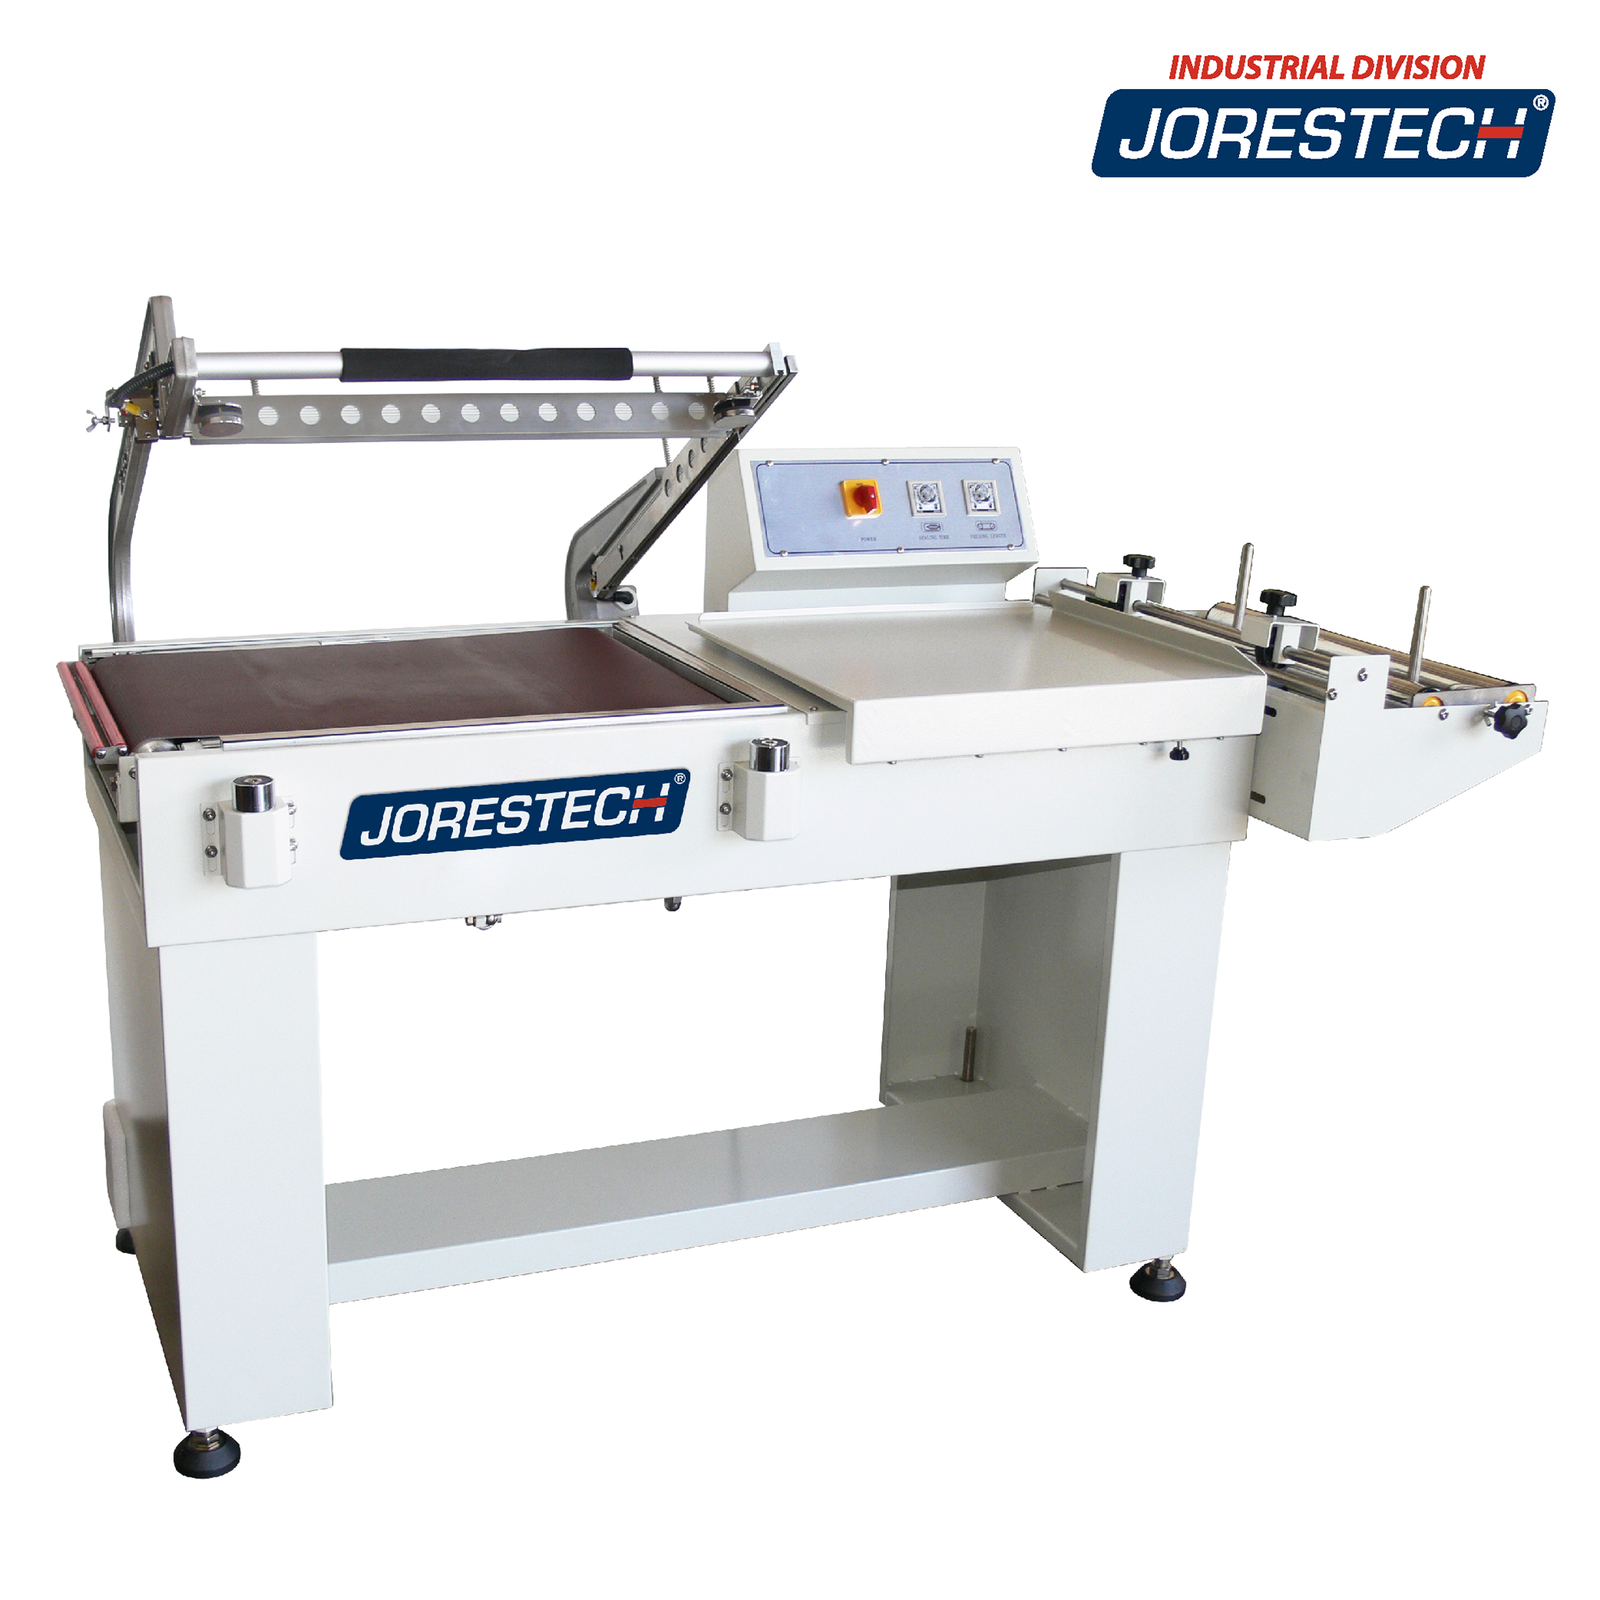 JORES TECHNOLOGIES® semi-automatic shrink film L bar heat sealer with conveyor for shrink packaging